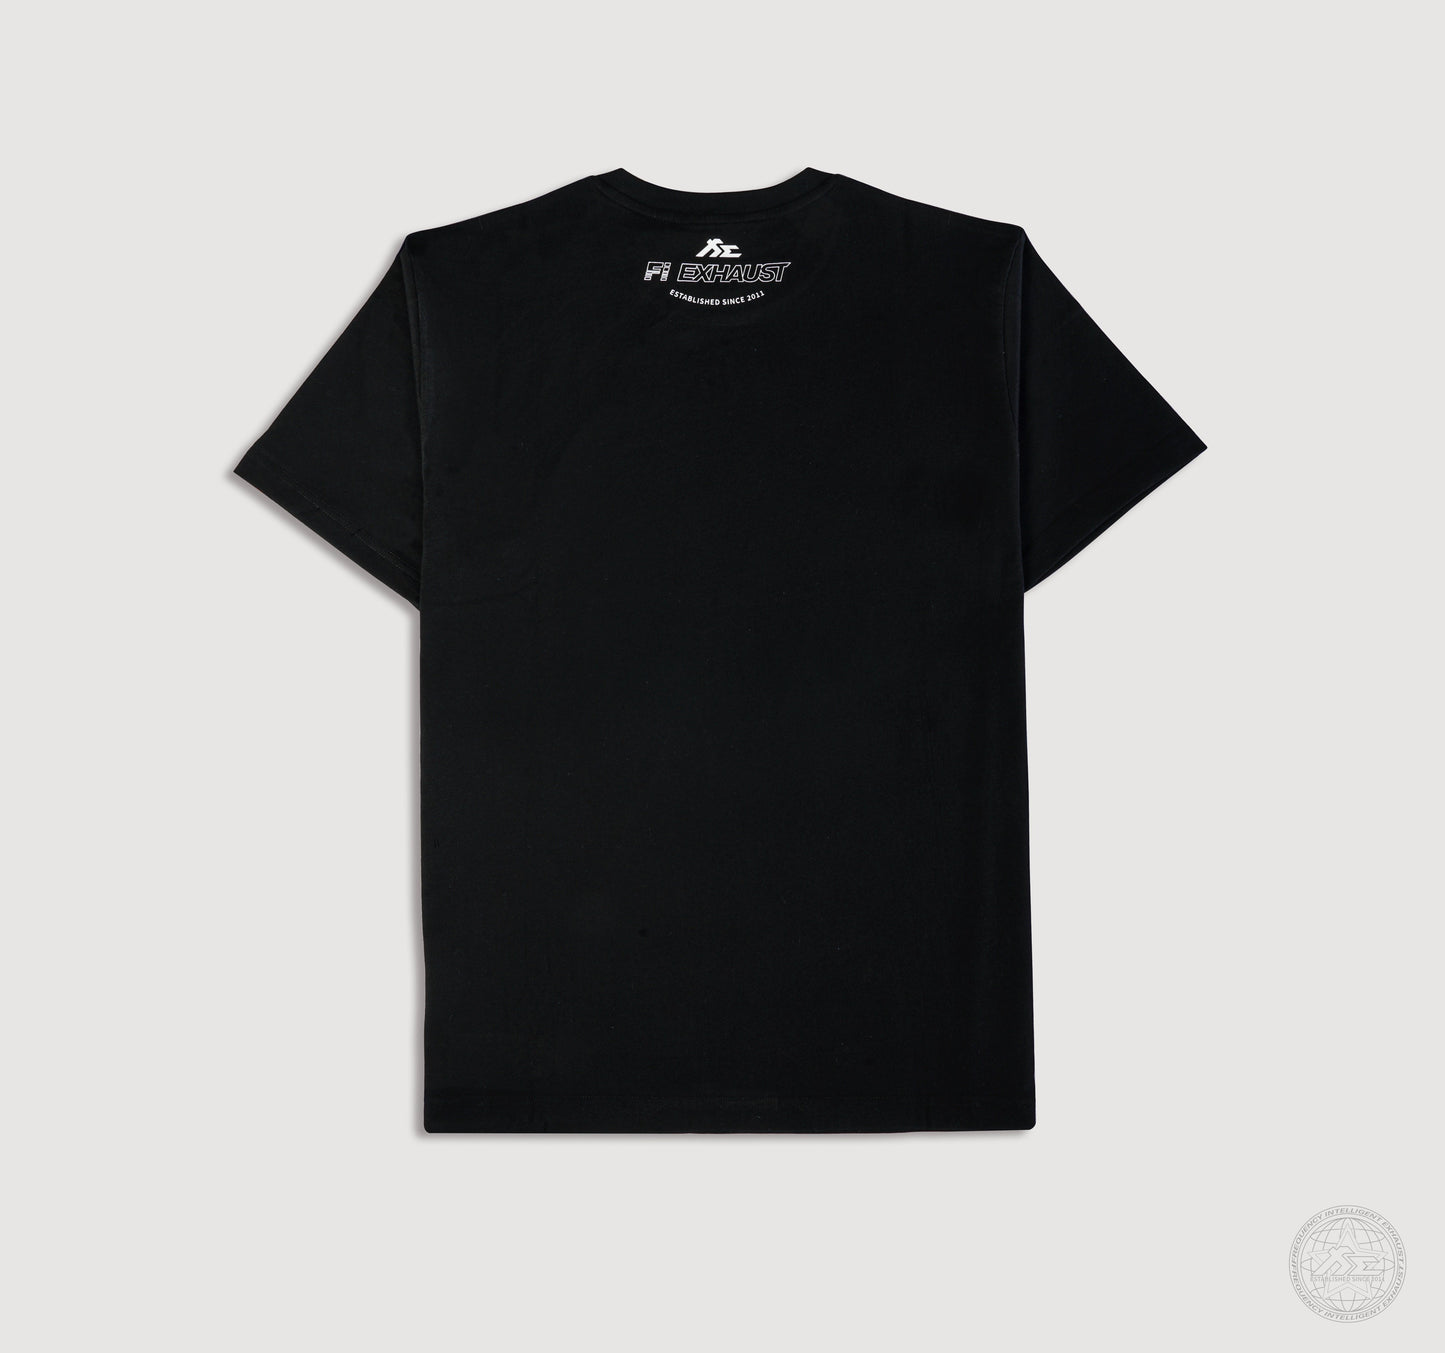 "Space Mods" Black Heavyweight Crew Neck T-Shirt [Limited Ed.]